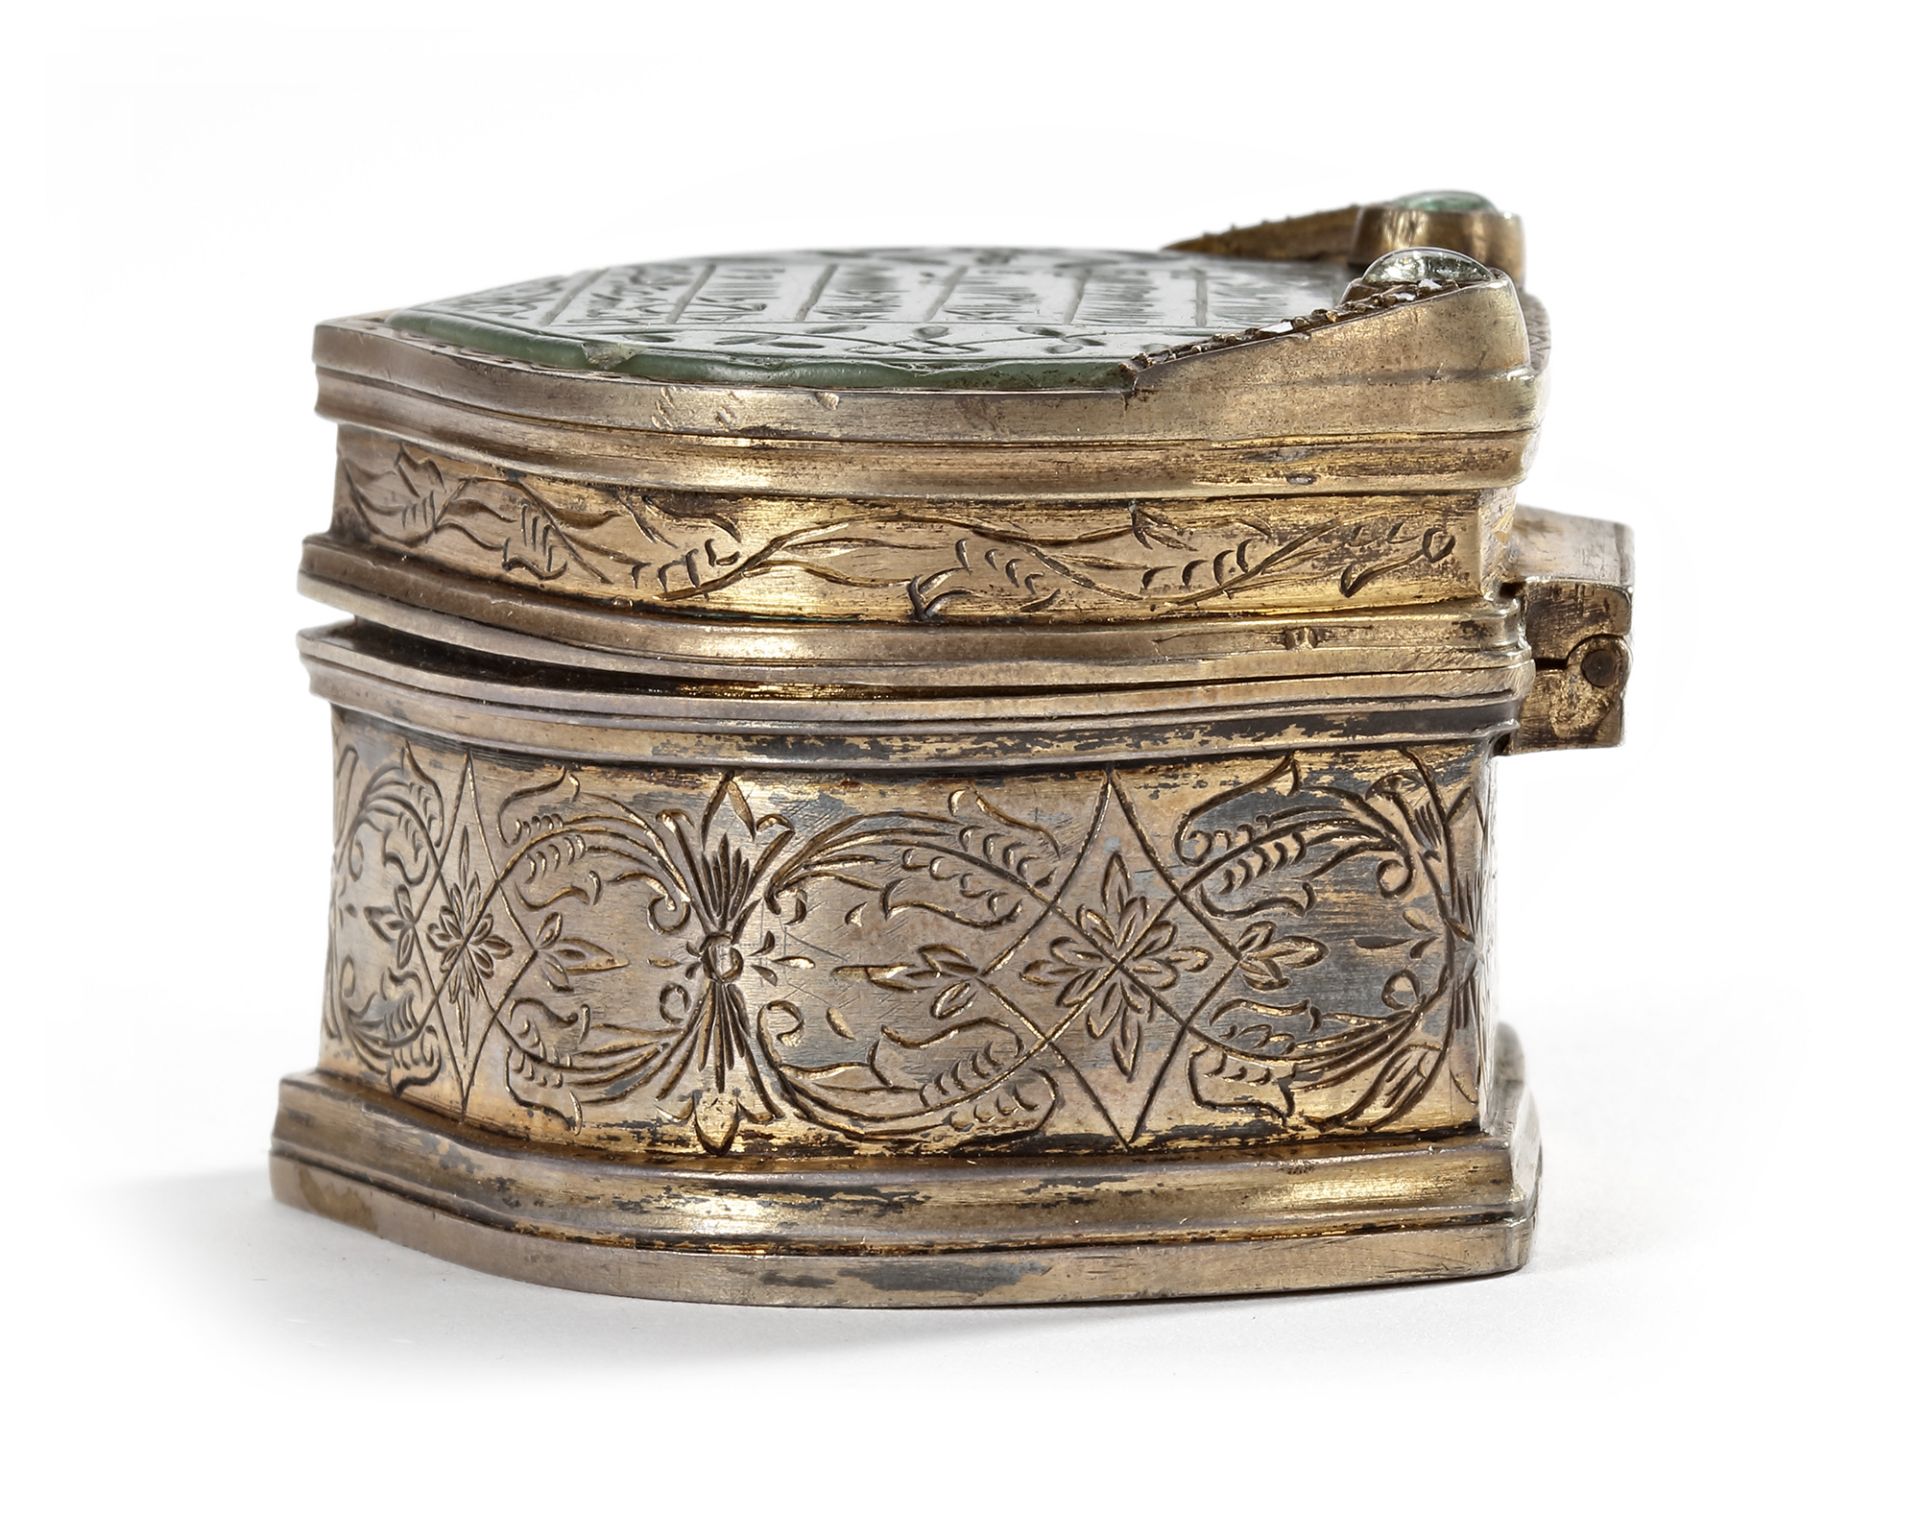 AN OTTOMAN JADE AND GEM-SET SILVER PLATED CASKET, 16TH CENTURY - Image 4 of 12